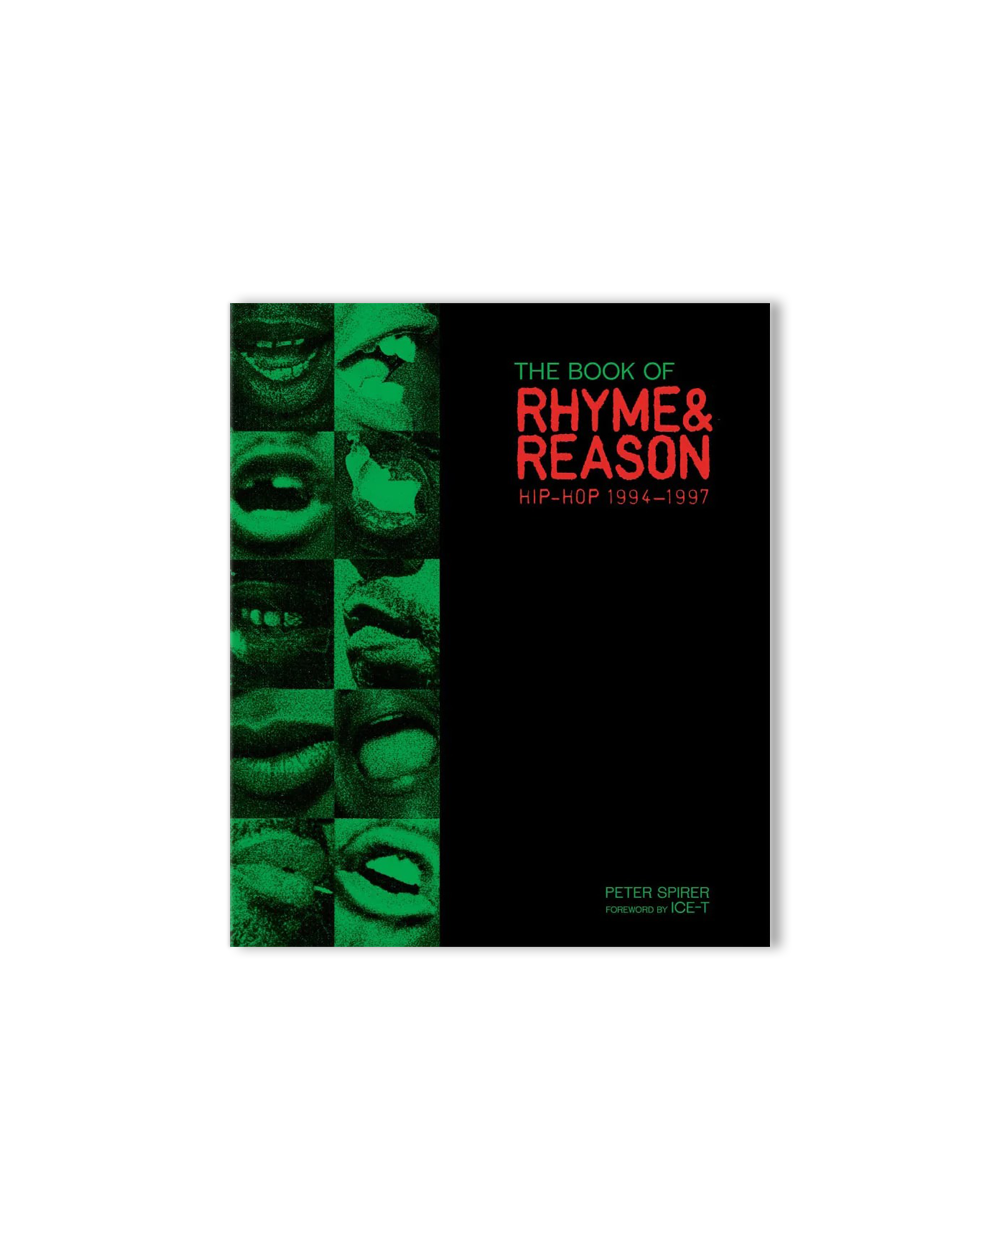 The Book of Rhyme & Reason